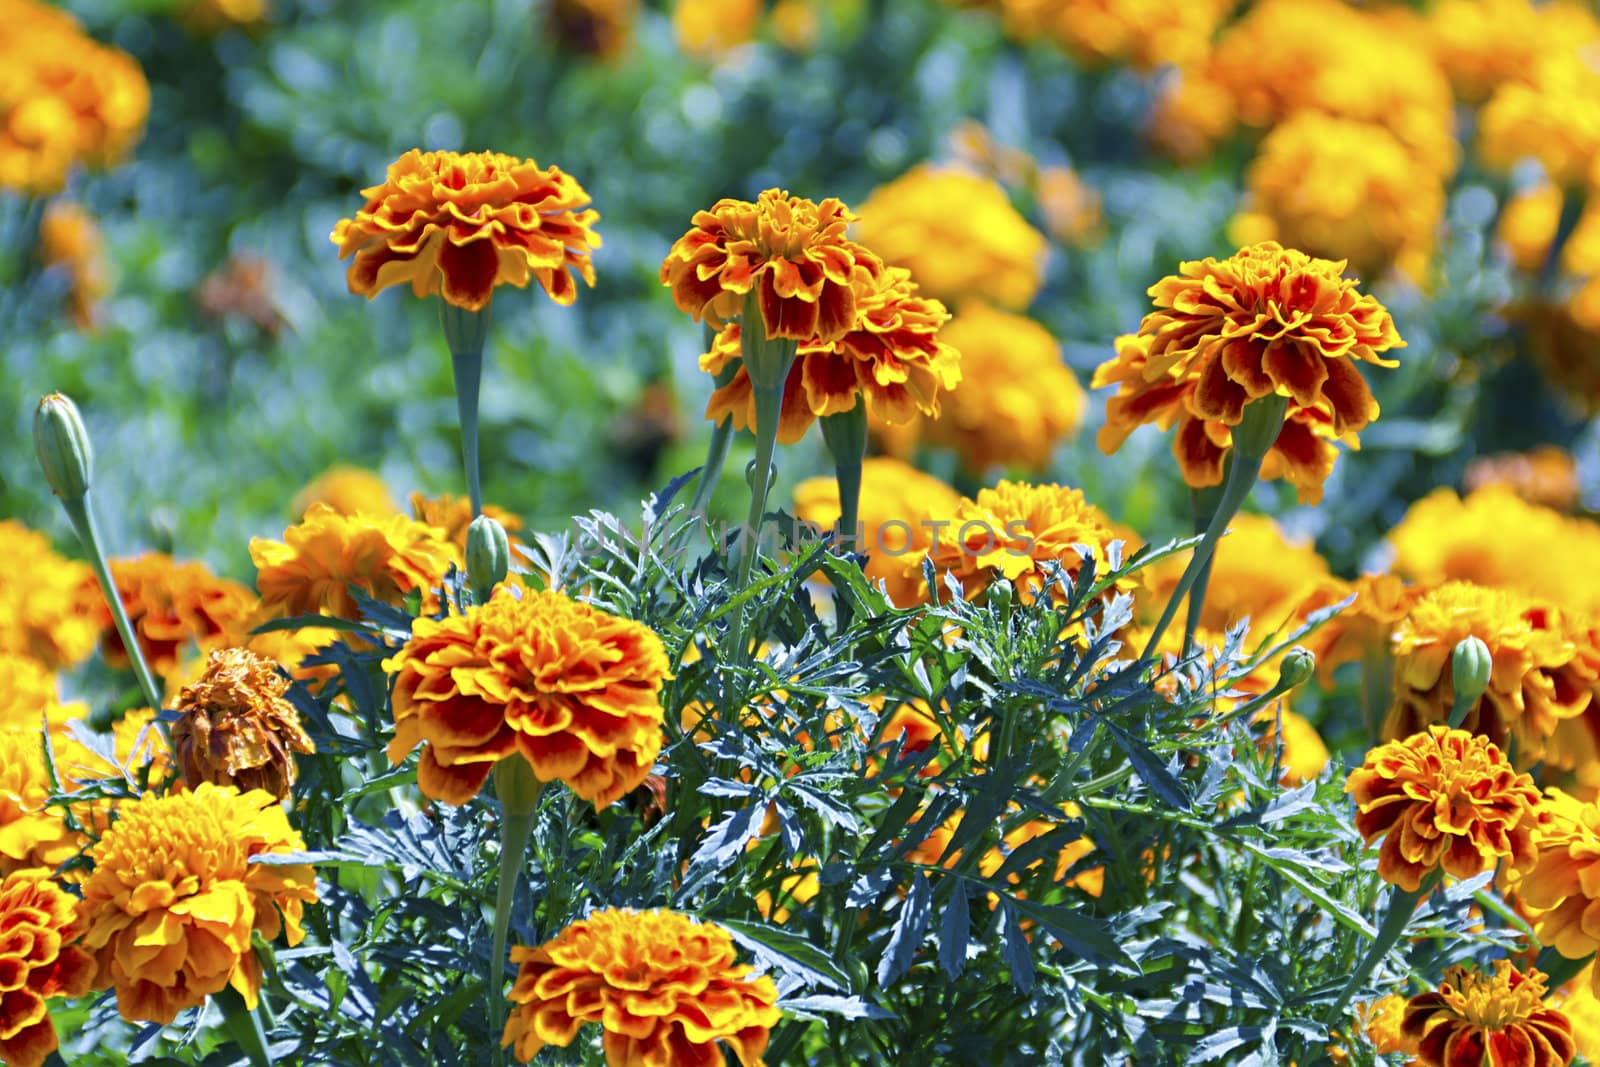 Tagetes flower on a bed in the background